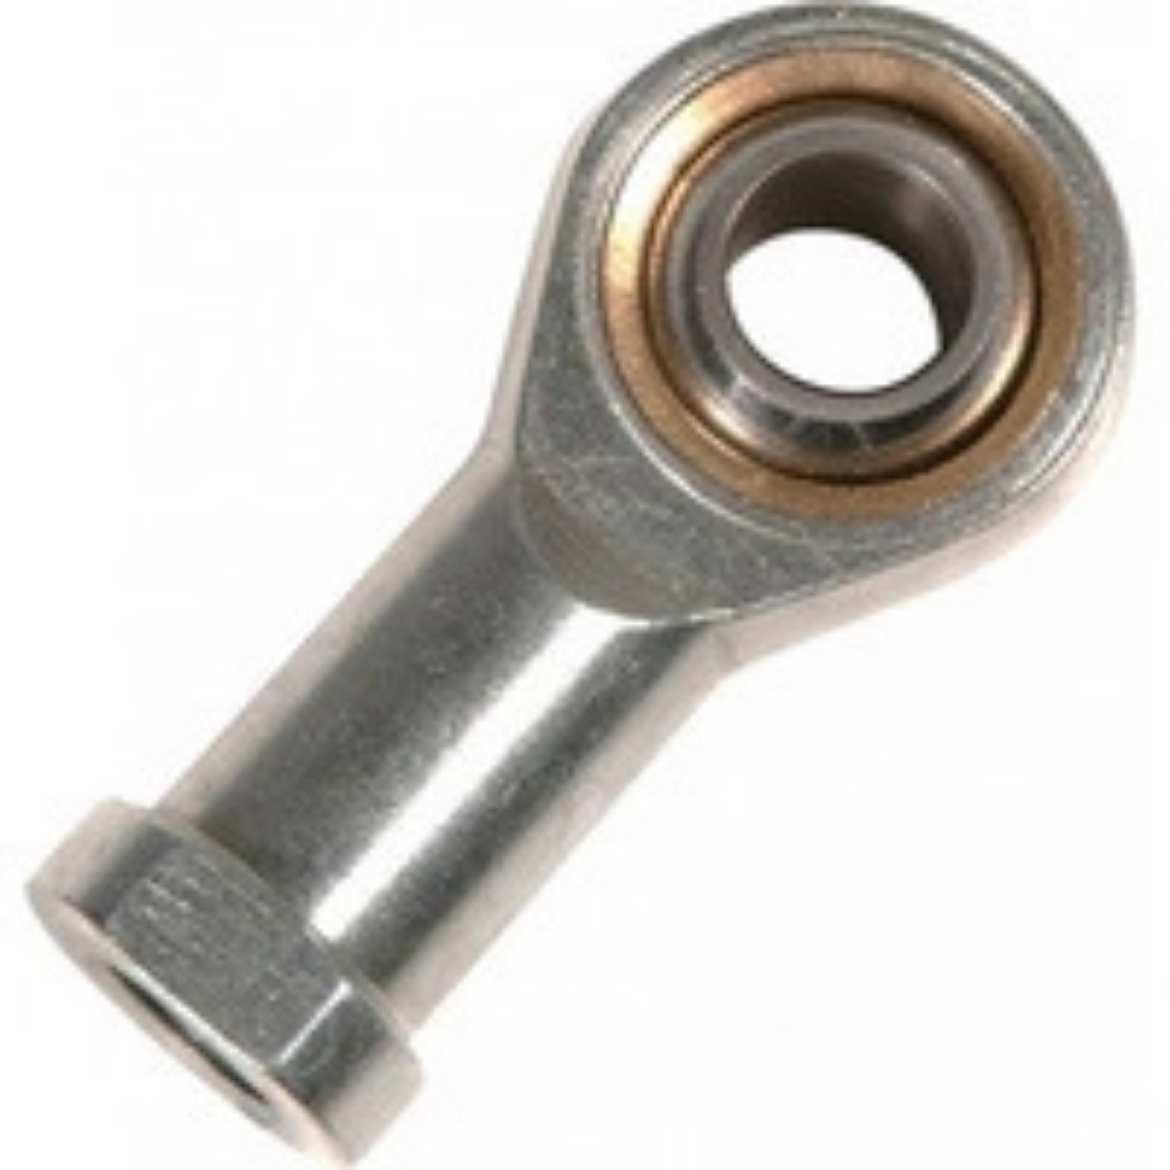 Picture of ROD END RH 1/4 BORE, 1/4-28 FEMALE END